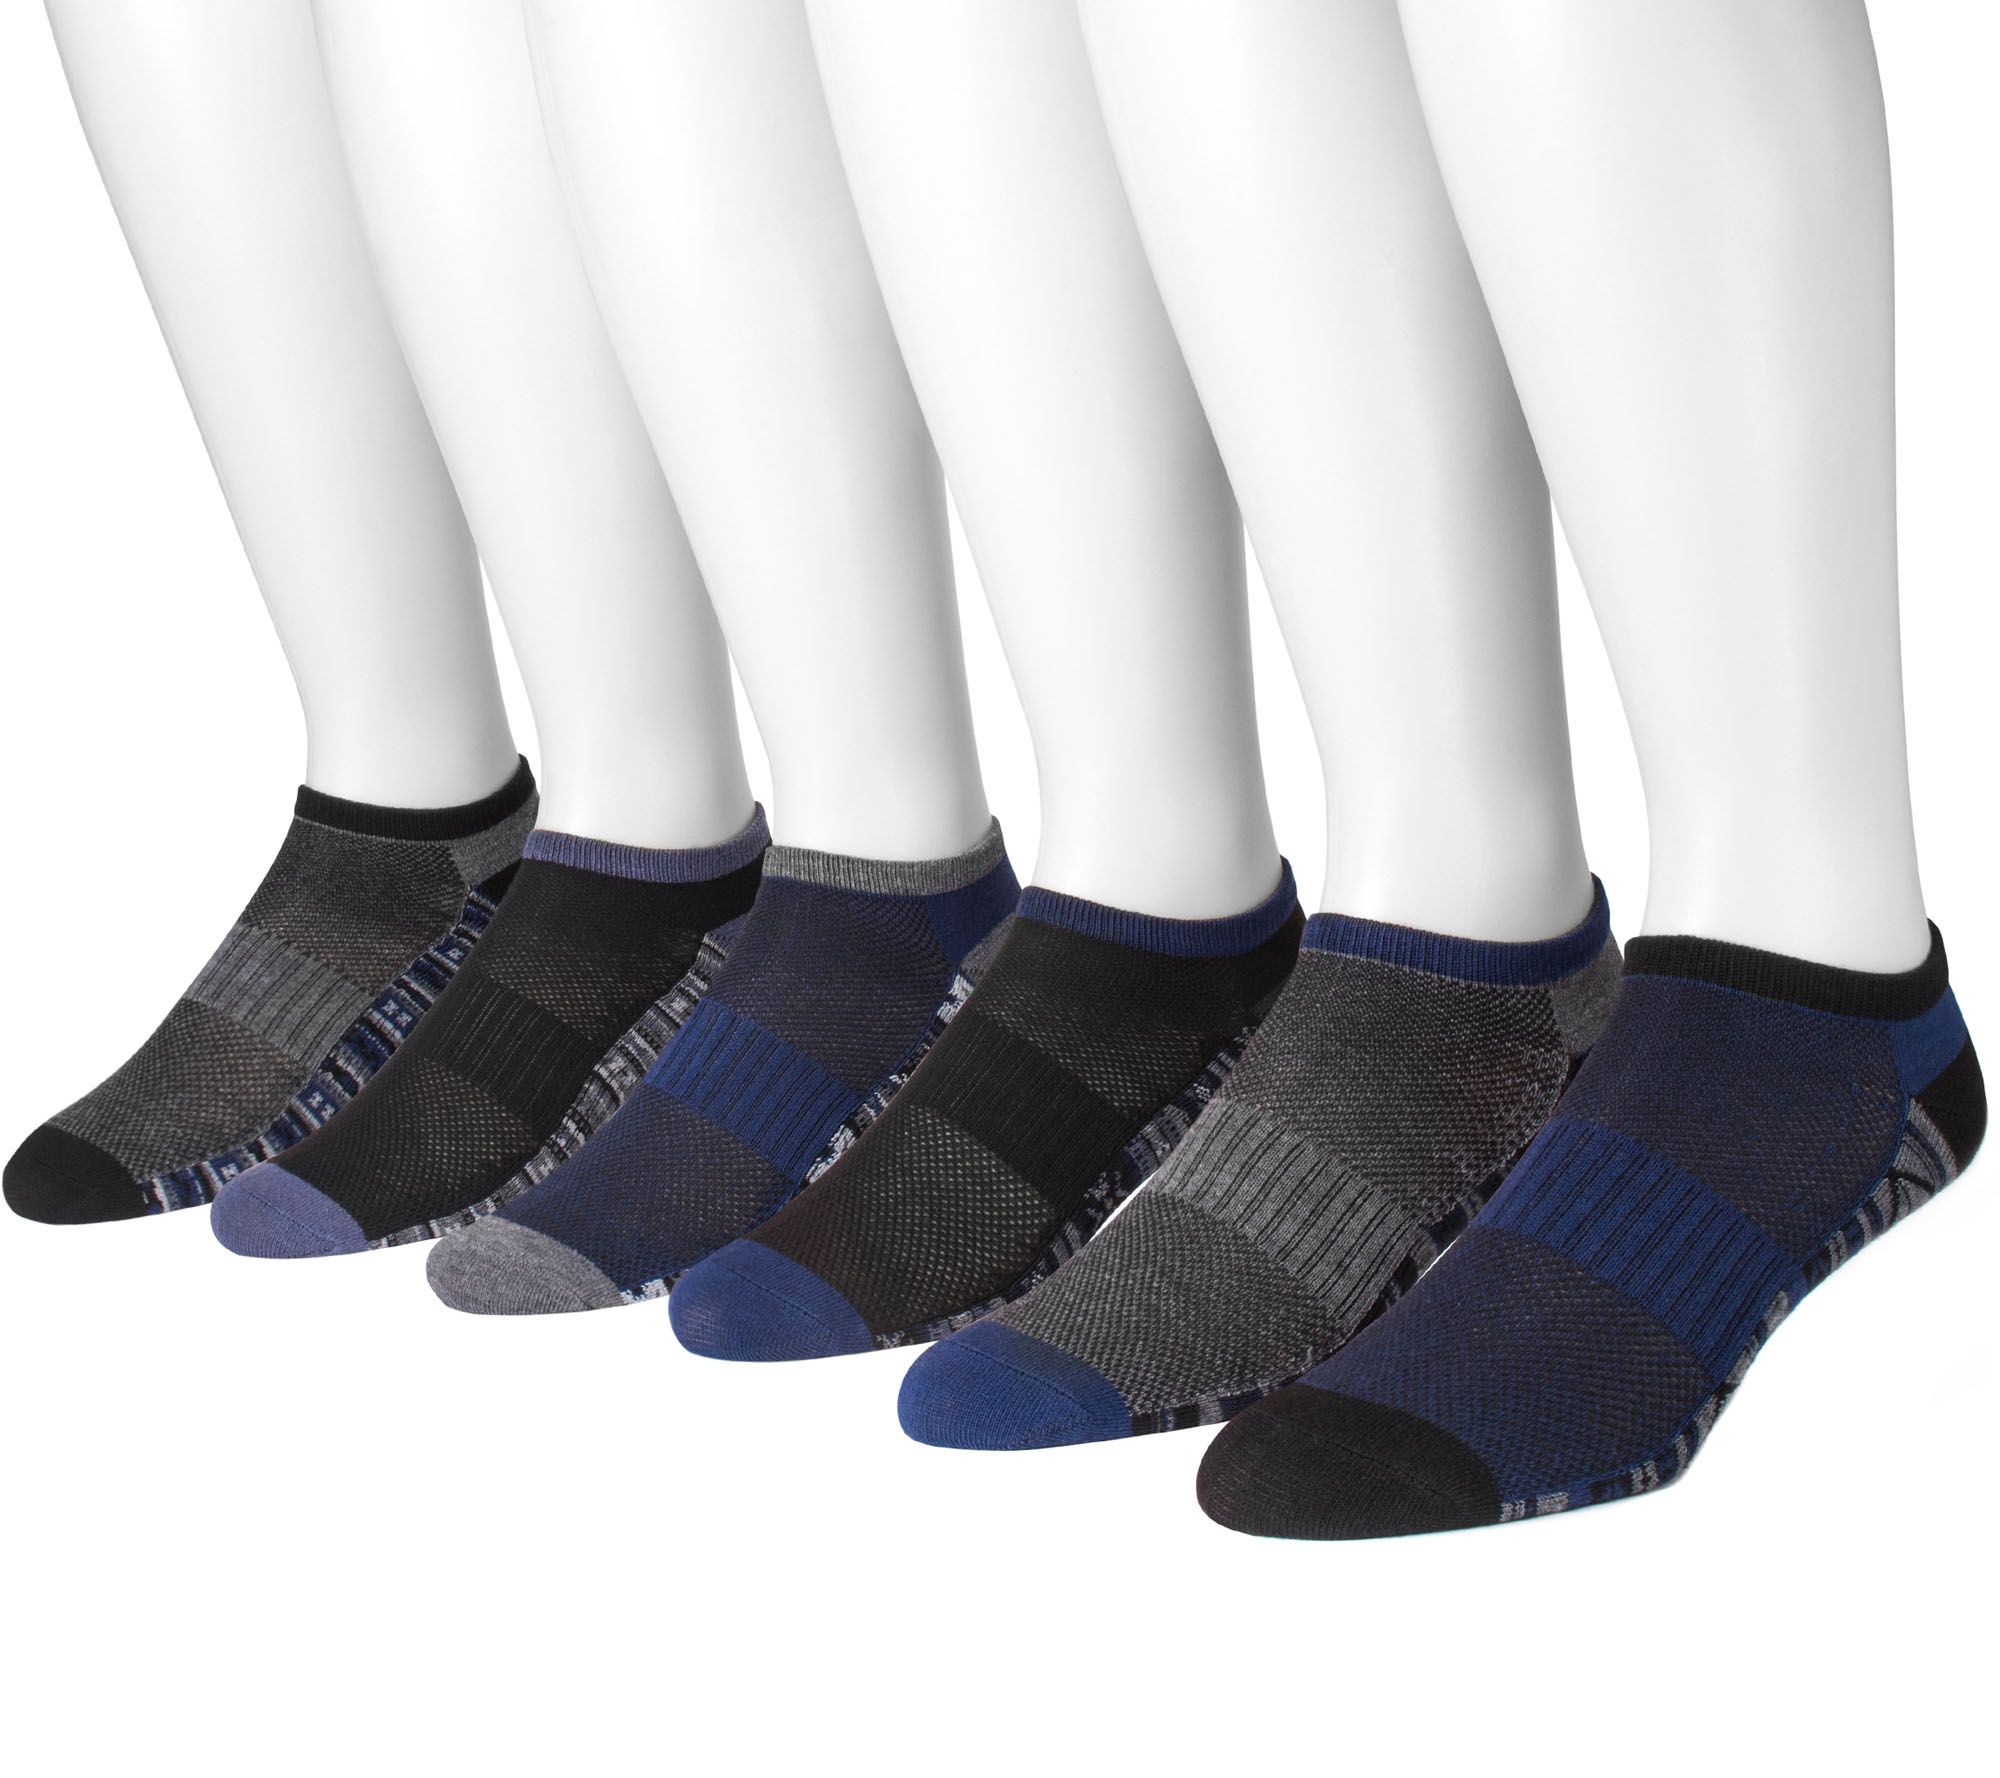 MUK LUKS Men's 6 Pair Pack No-Show Compression Arch Socks - Page 1 ...